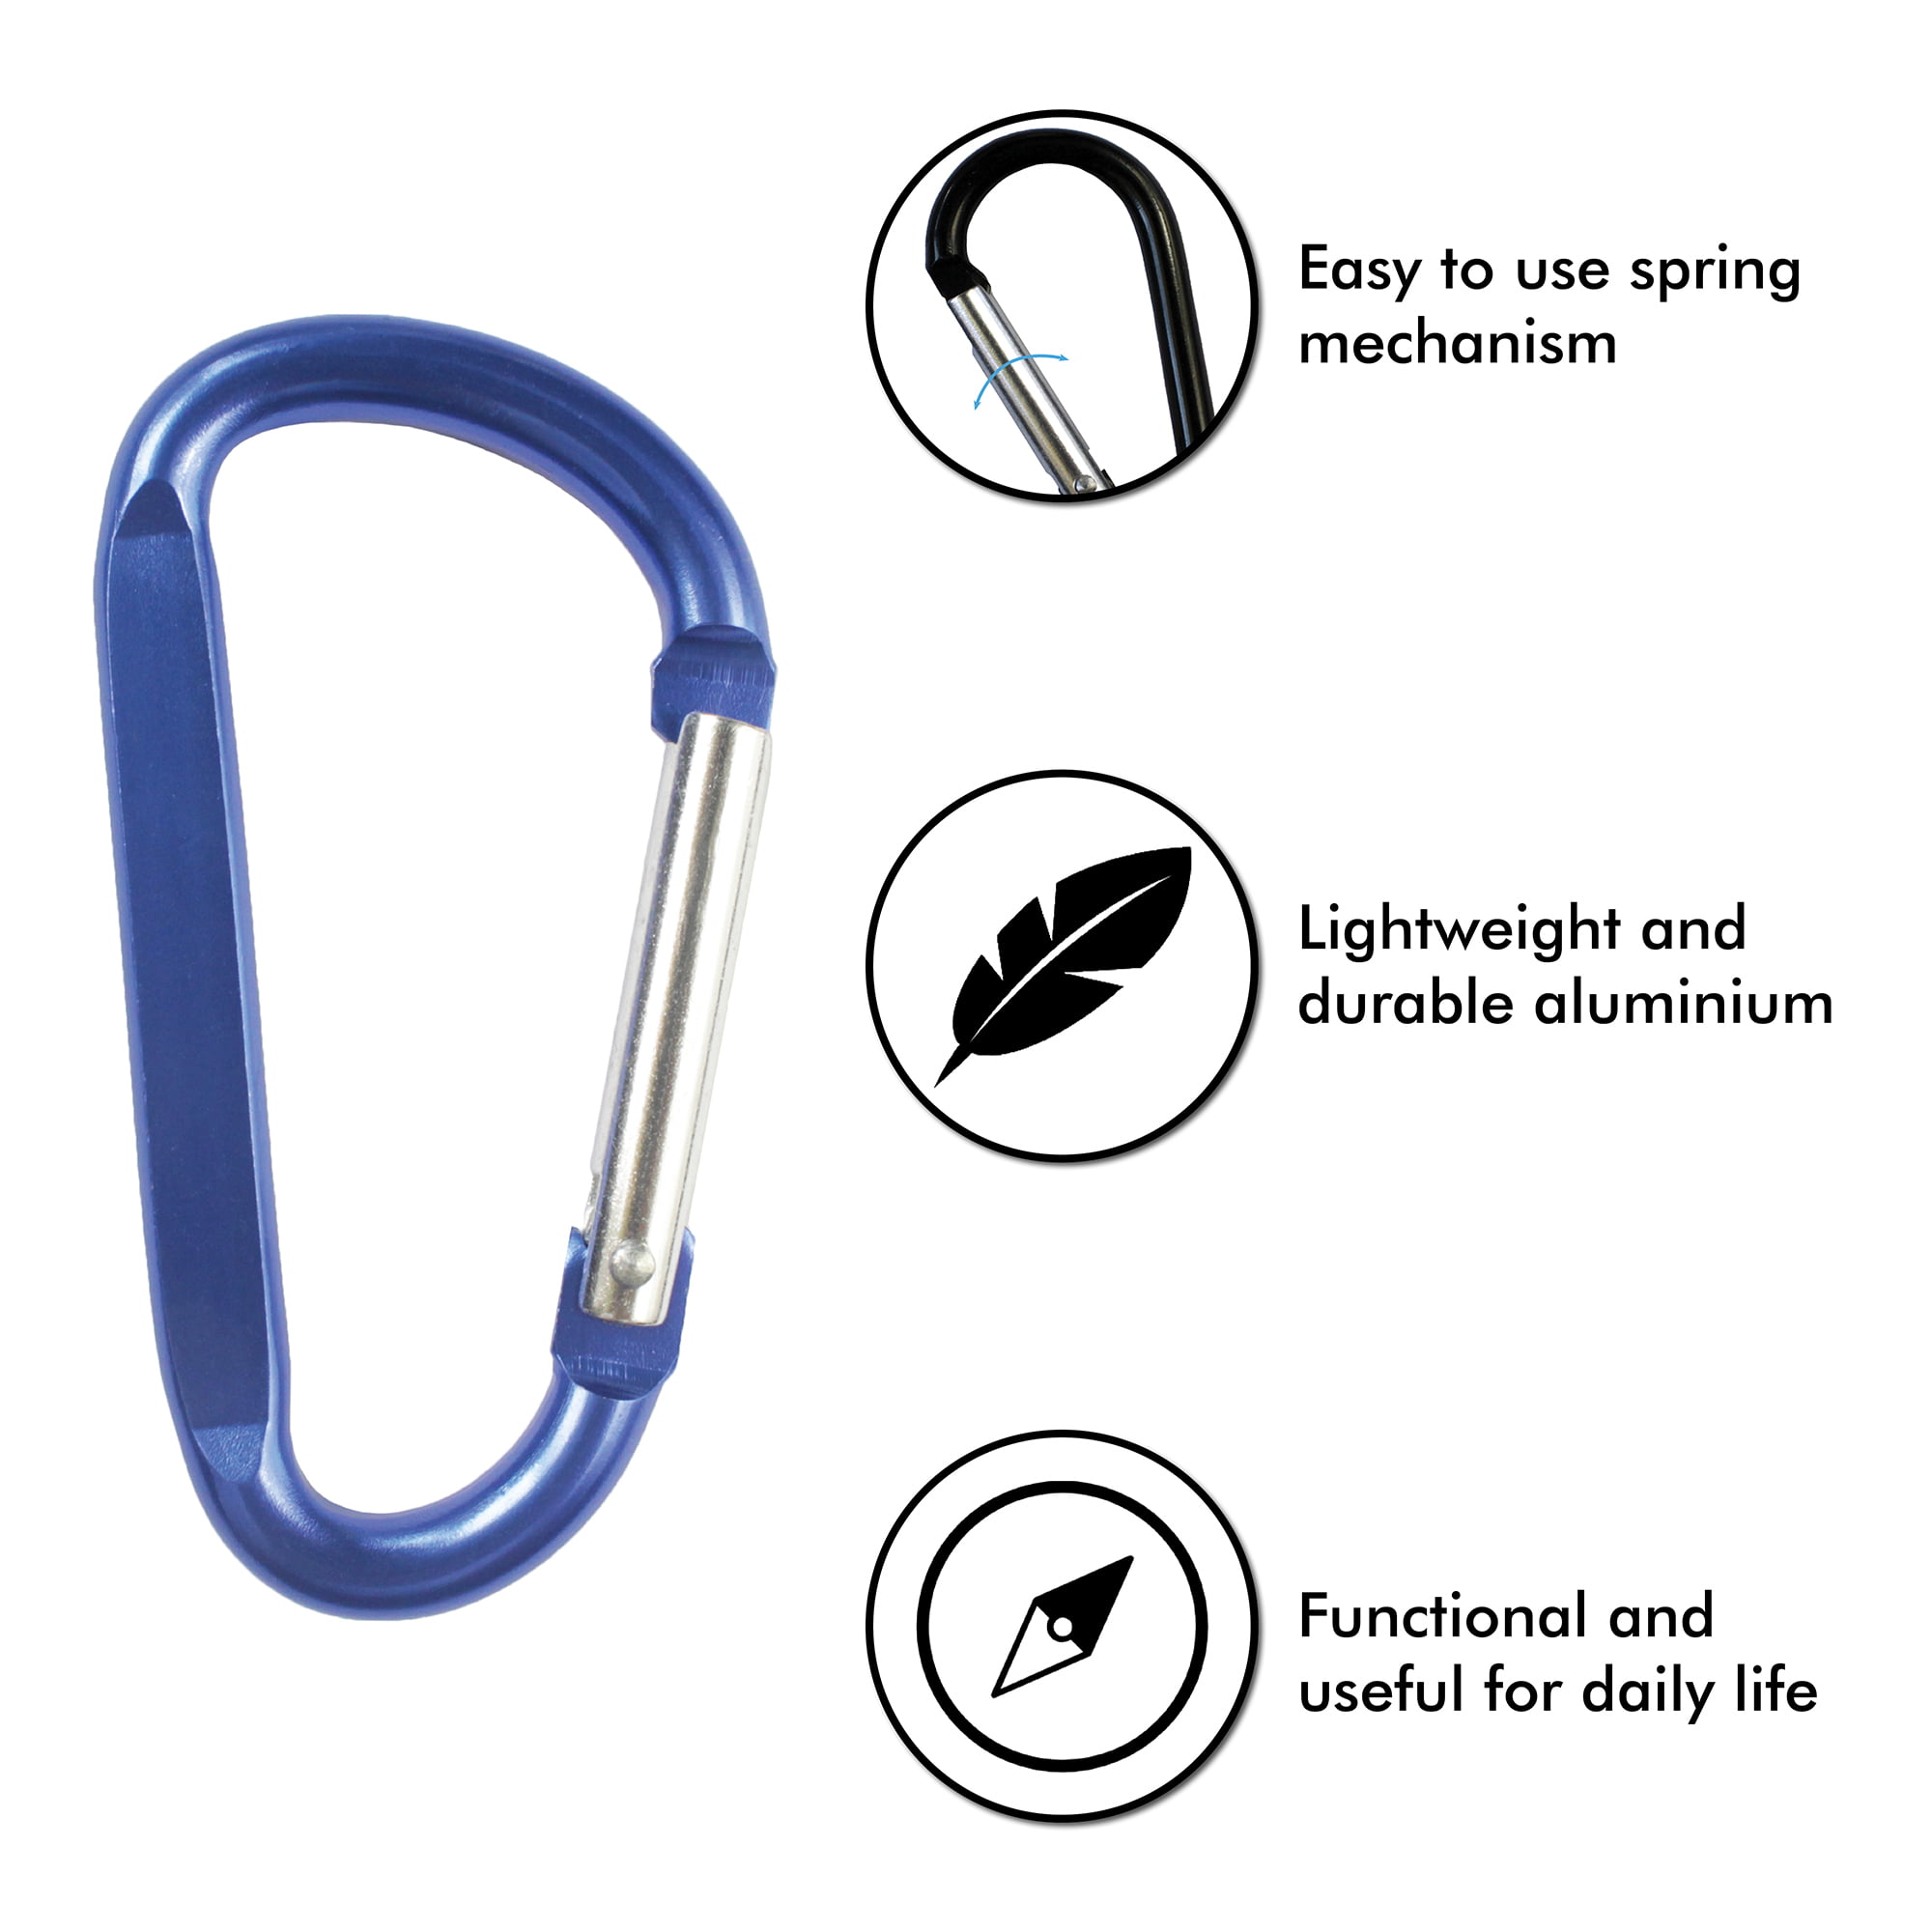 12pcs 3” Aluminium Carabiner Clip Vibrant Colors, Durable Spring-loaded  Gate Keychain Hook Pear Shape for Home, RV, Camping, Hiking, Fishing or  Traveling 